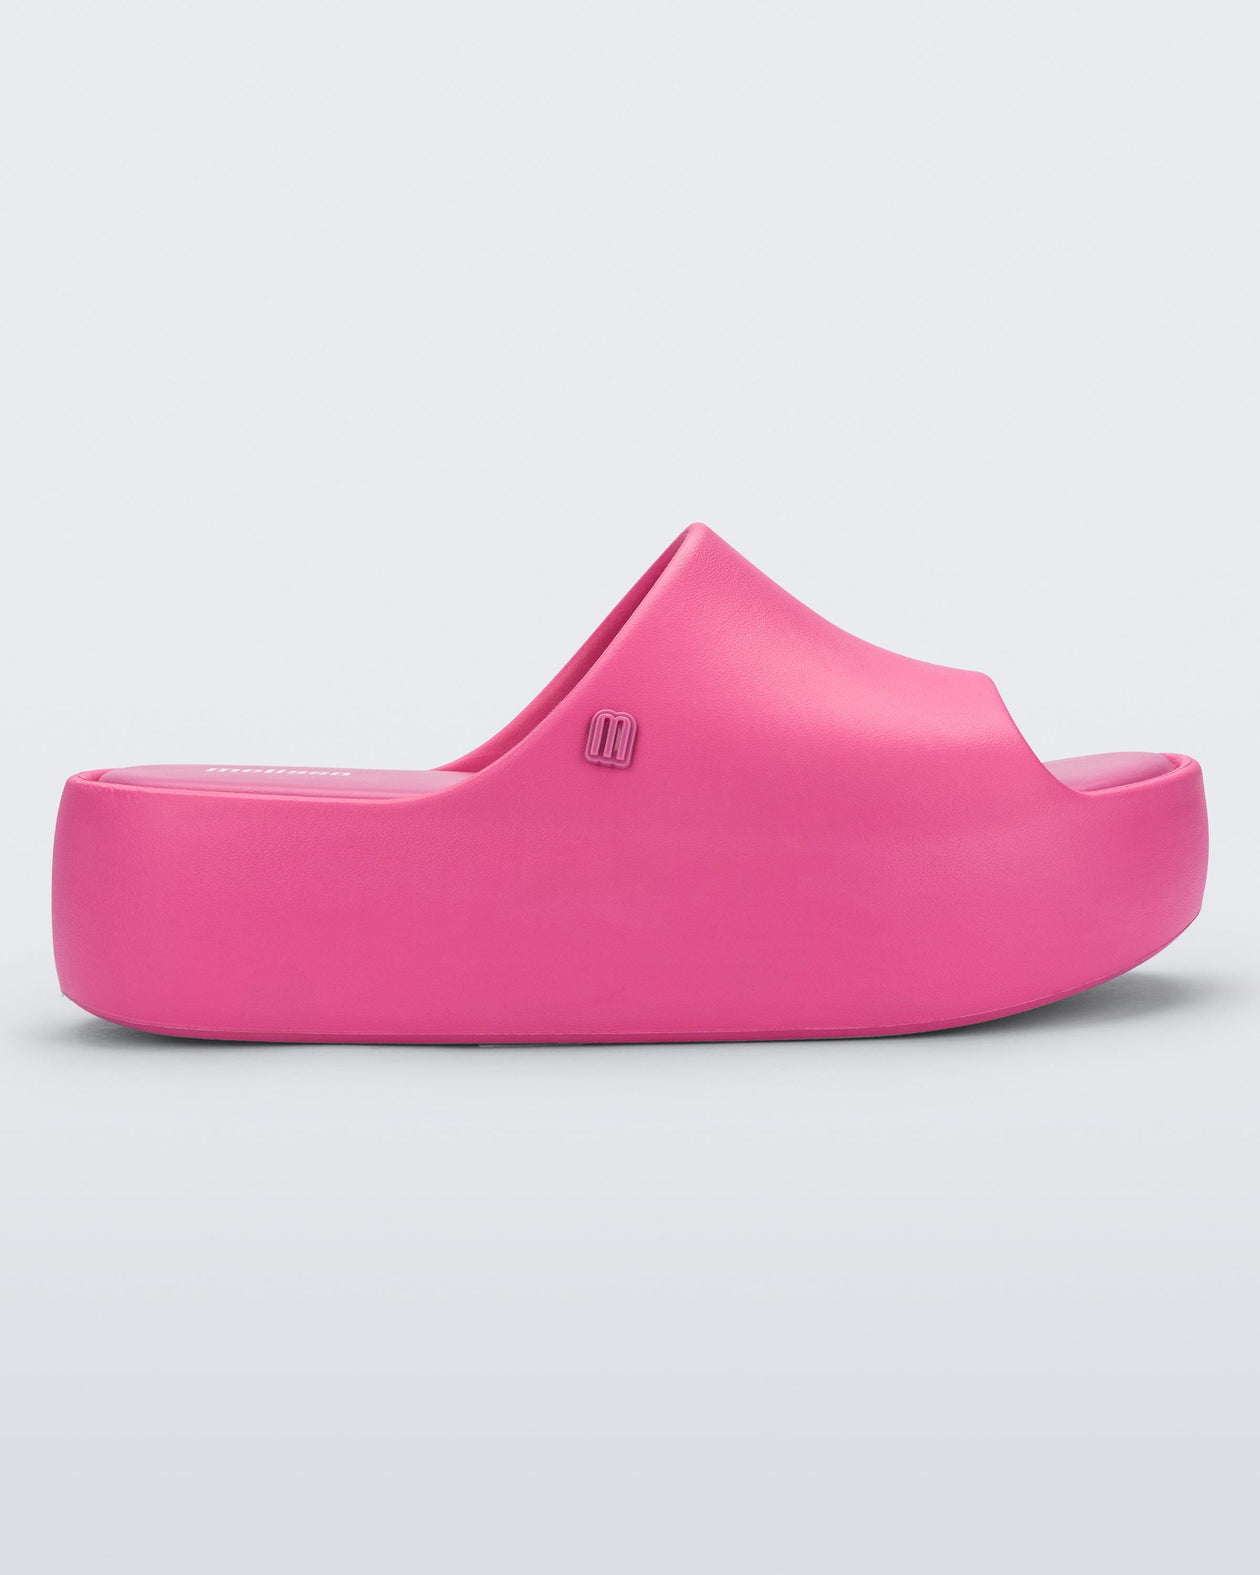 Side view of the pink Free Platform women's slide